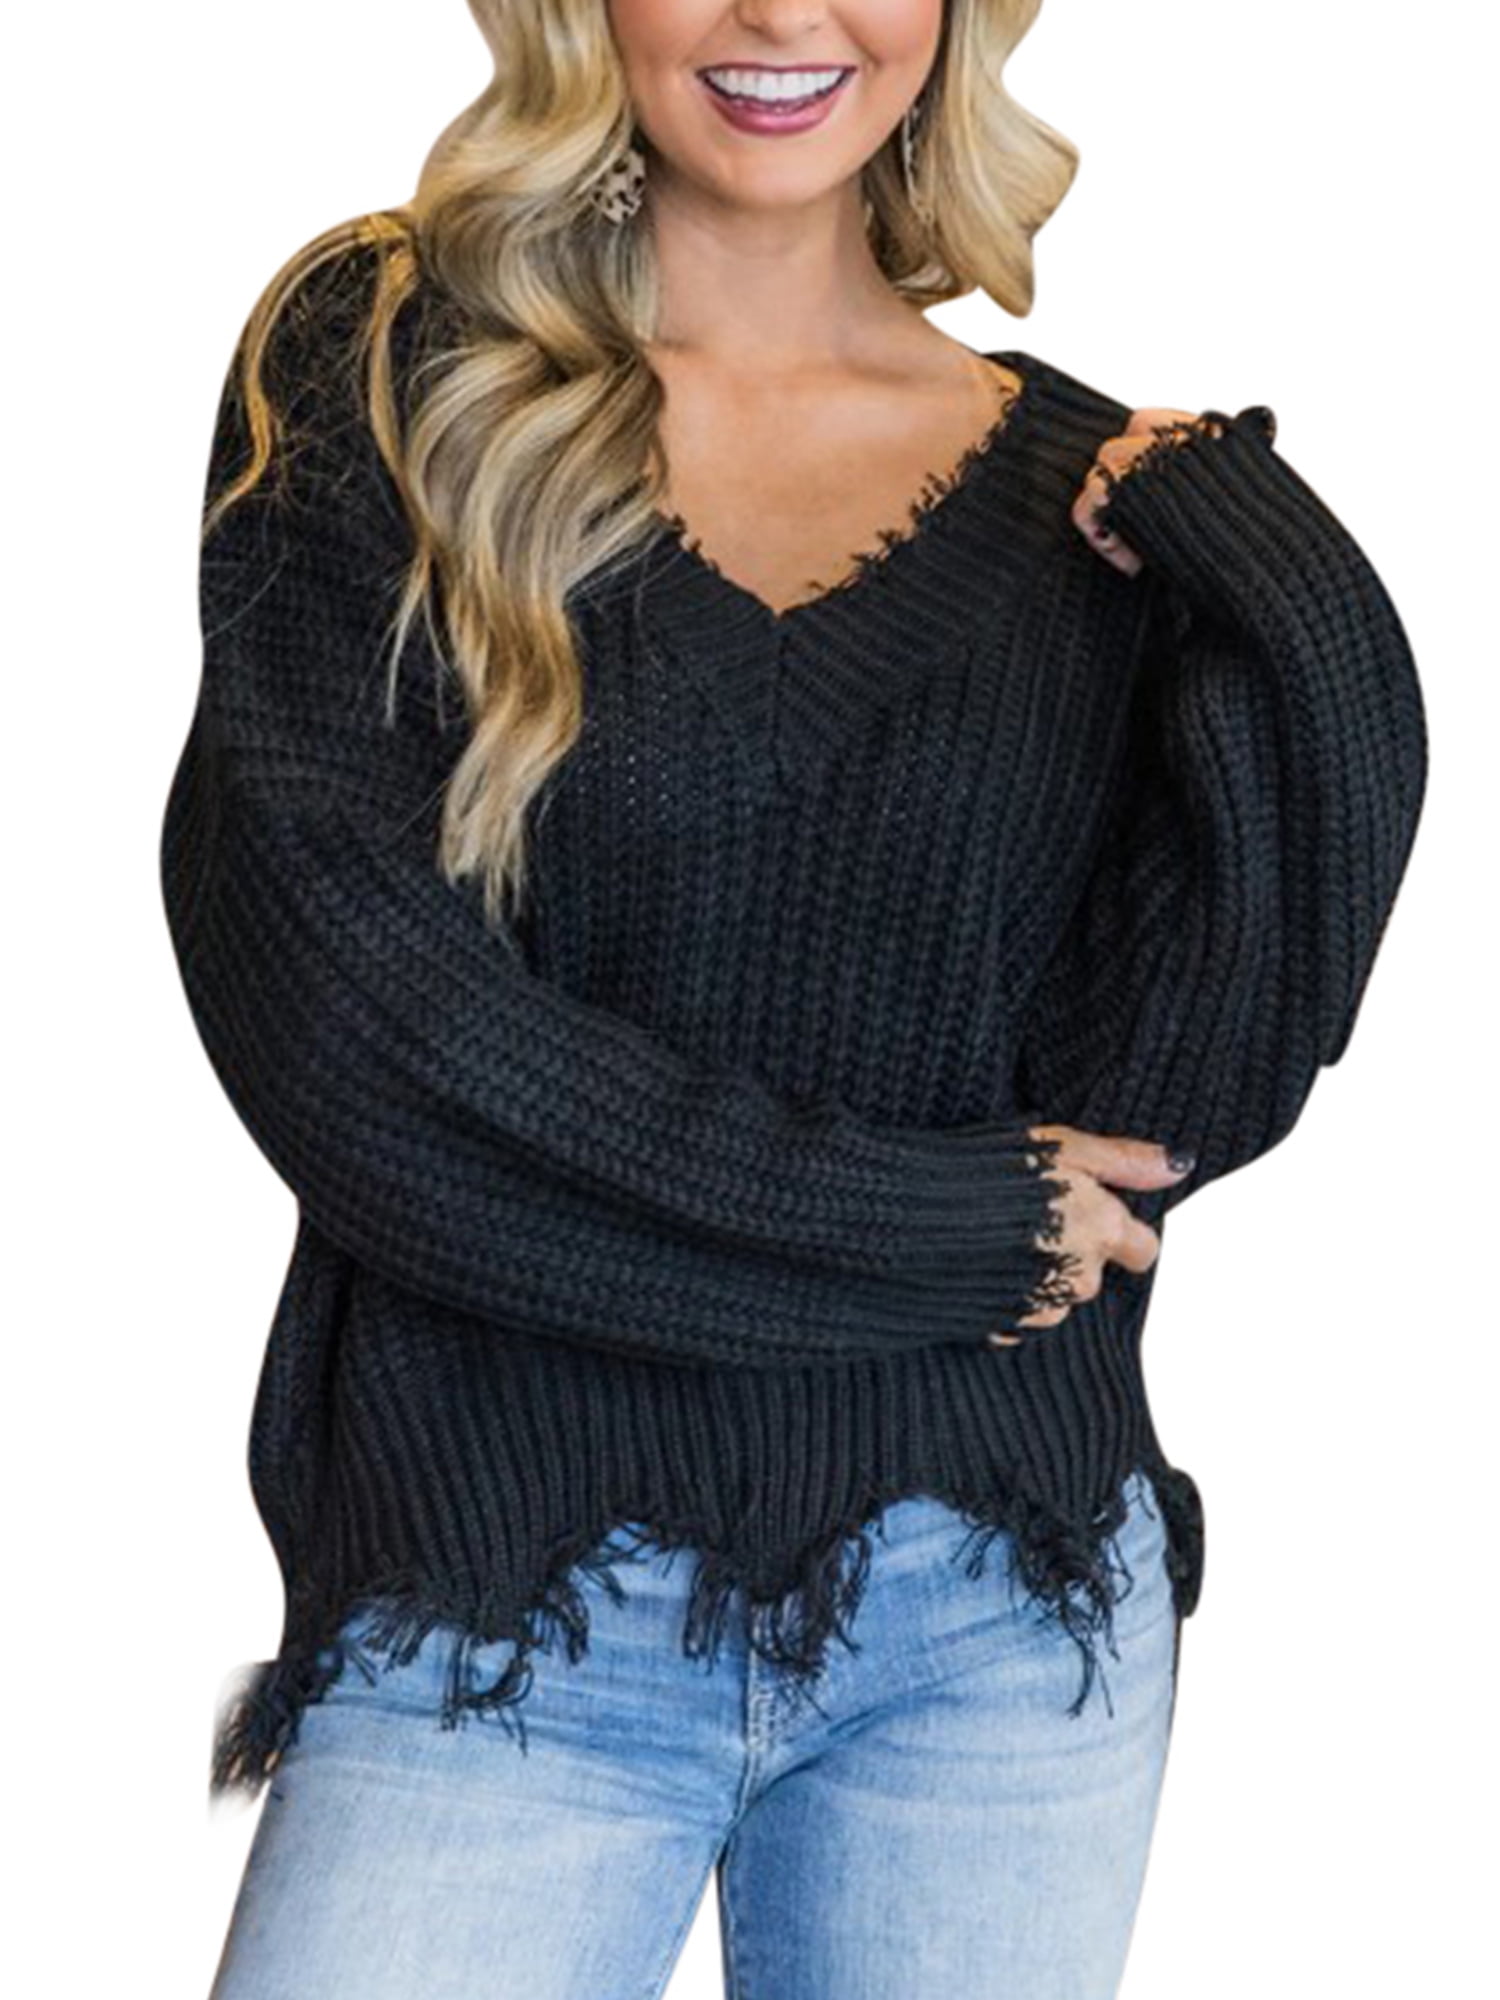 Womens V Neck Loose Knitted Jumper Sweater Baggy Oversized Long Sleeve Top Shirt